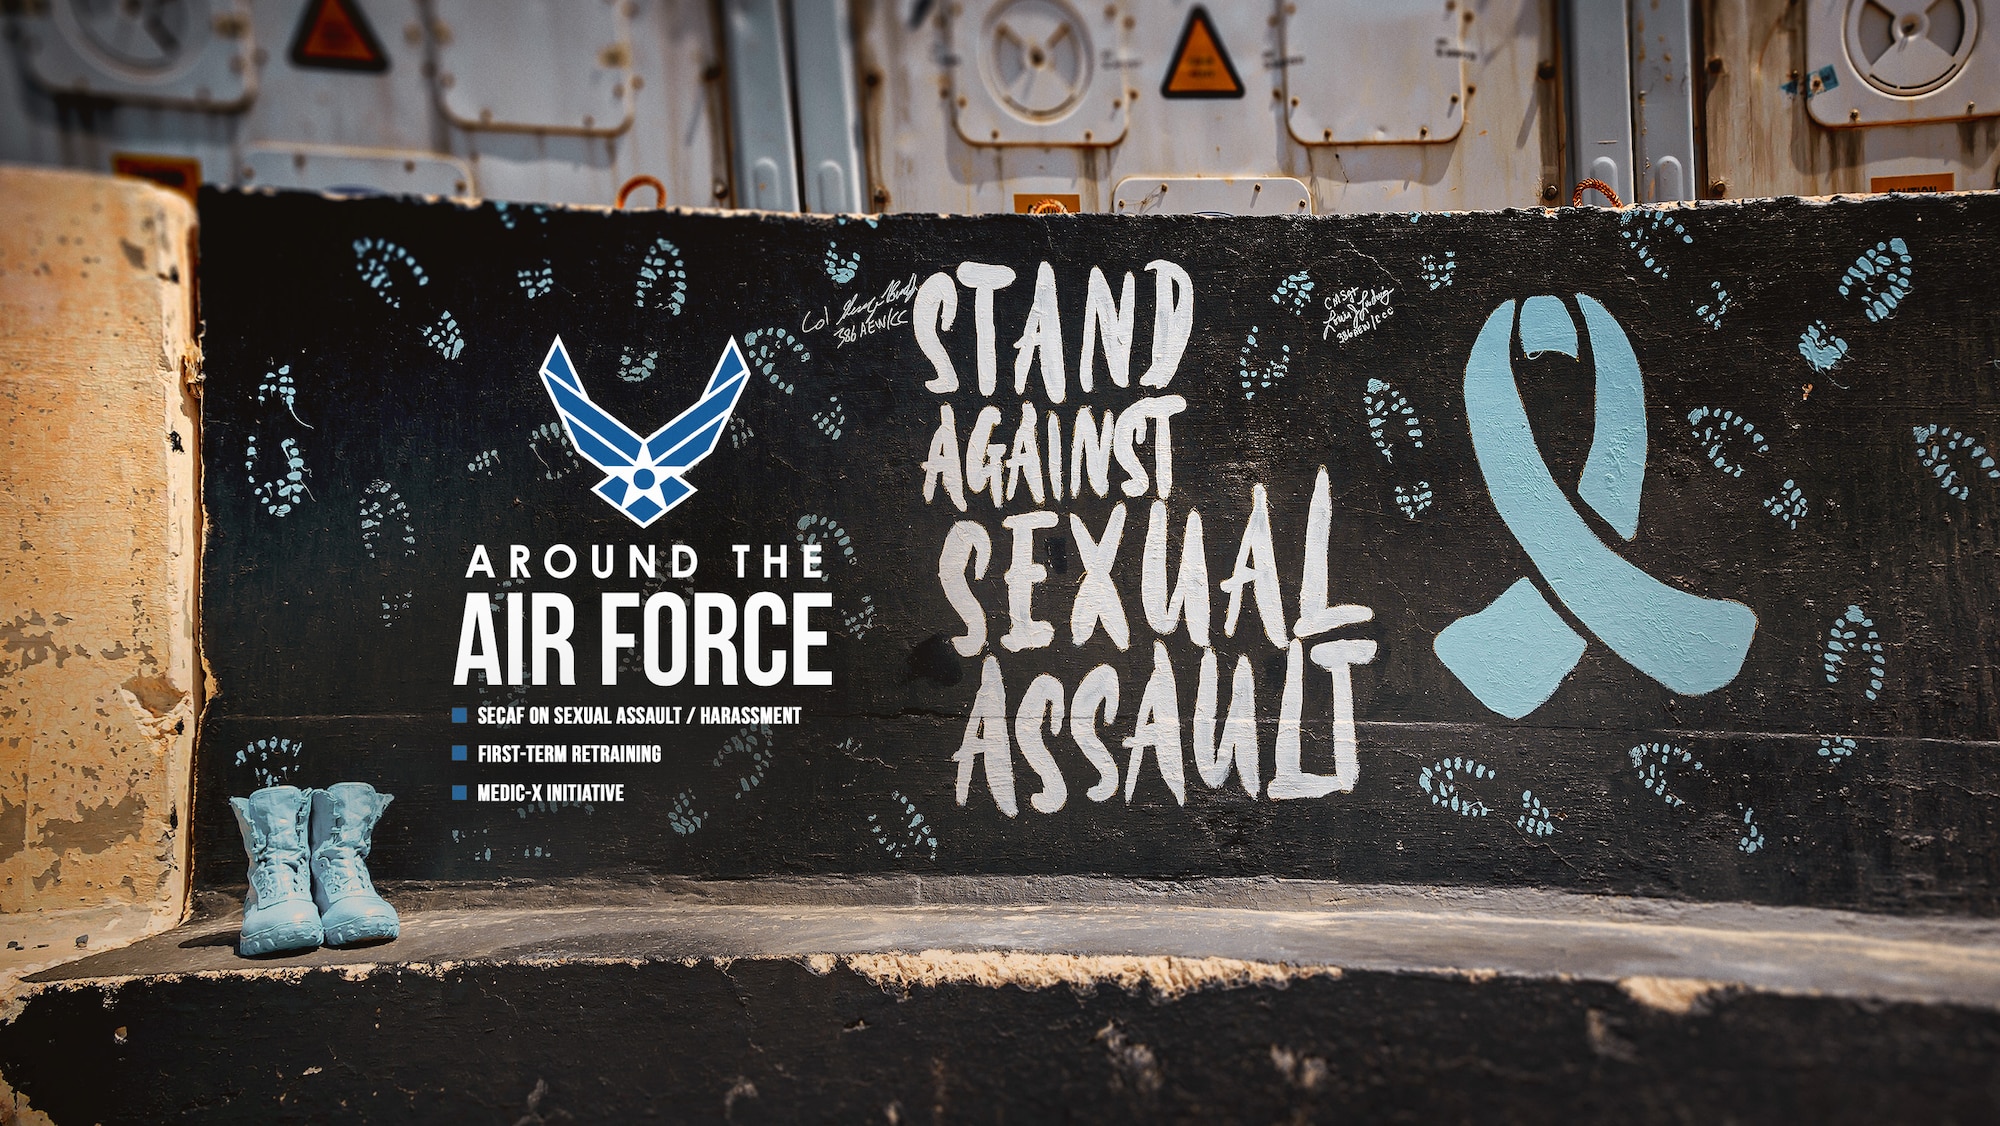 Around the Air Force SECAF on Sexual Assault, Harassment - First-term Retraining pic pic